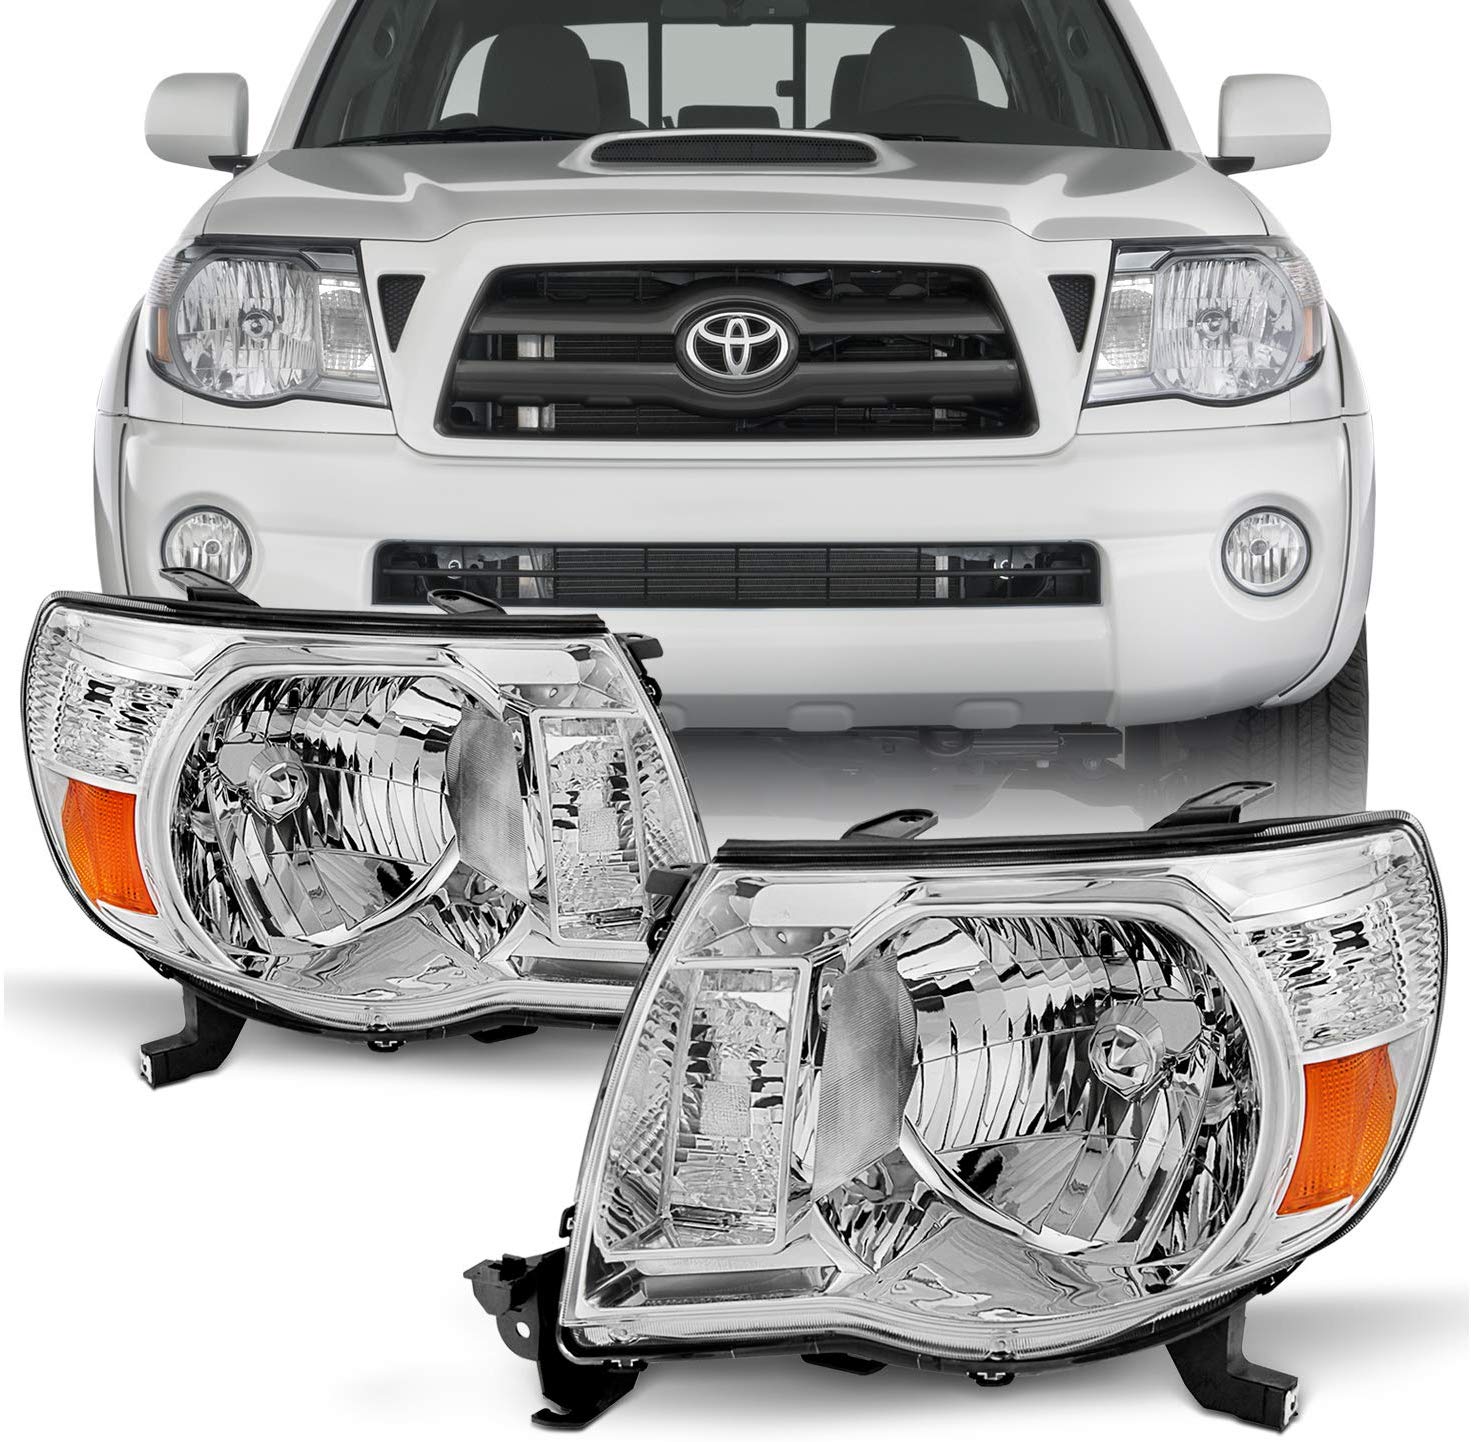 For 05-11 Toyota Tacoma Pickup Truck Headlights Front Lamp Direct Replacement Pair Left + Right